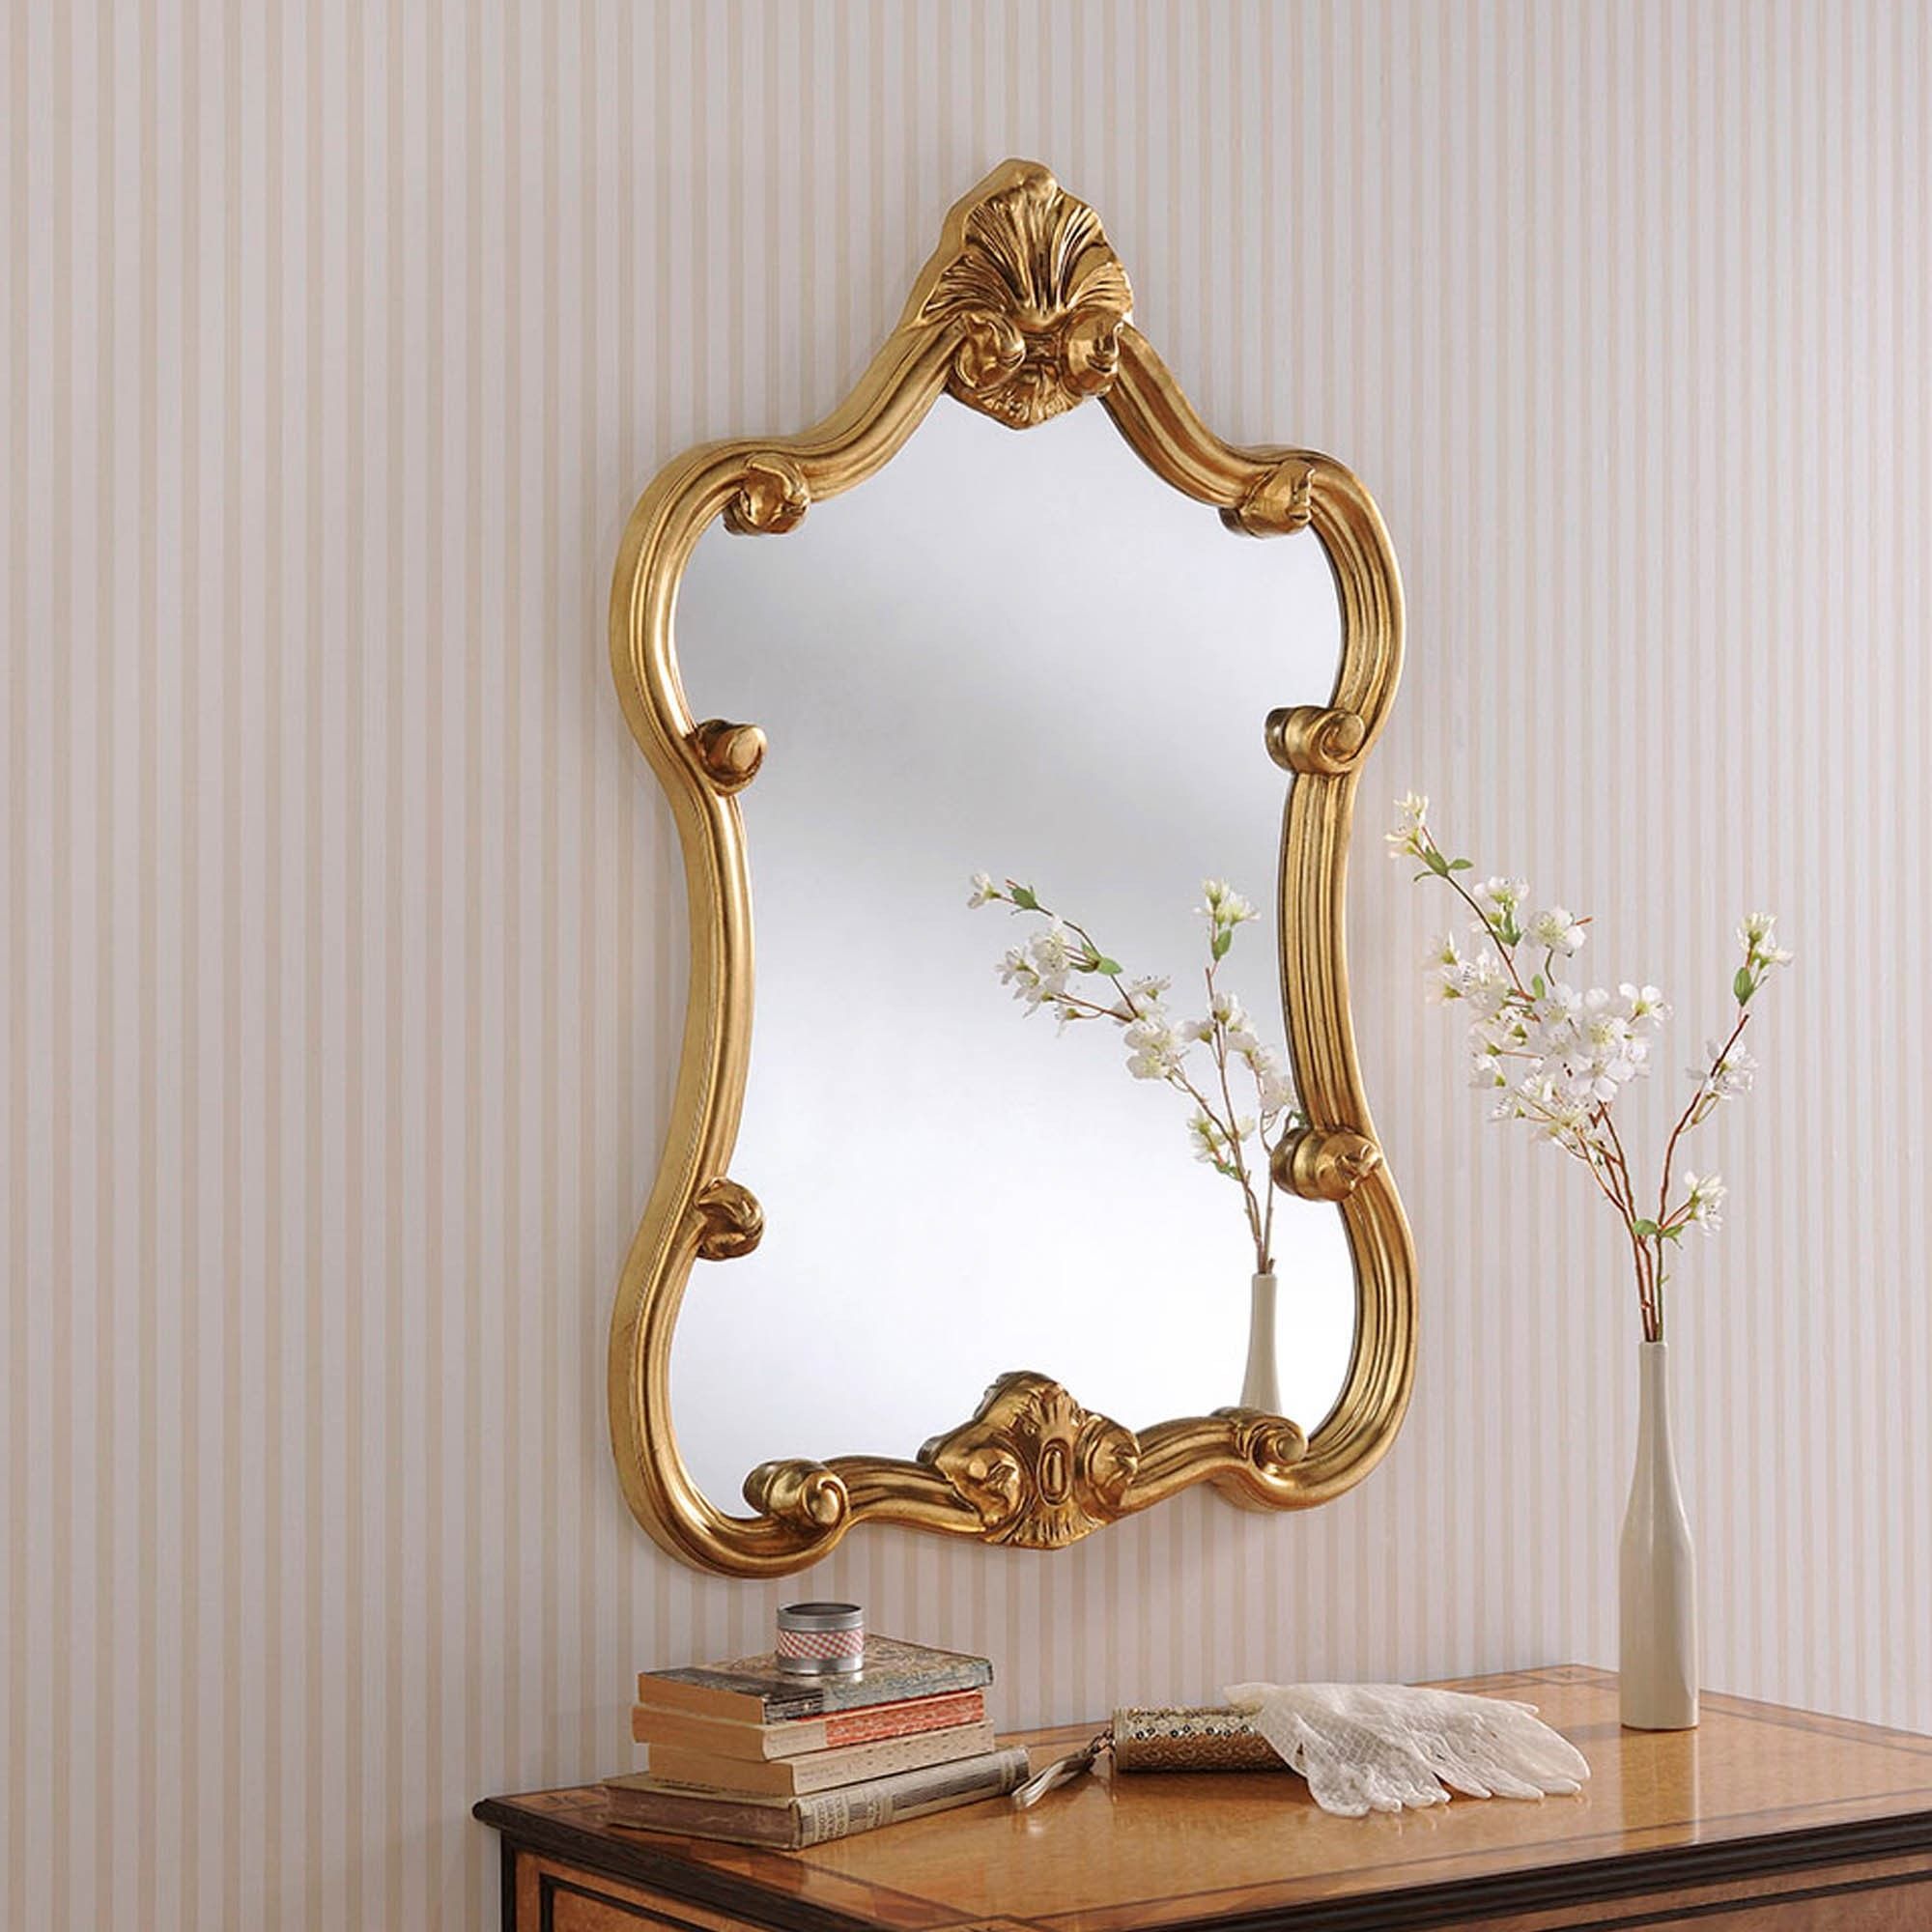 Decorative Gold Ornate Wall Mirror | Wall Mirrors Intended For Wall Mirrors (View 10 of 15)